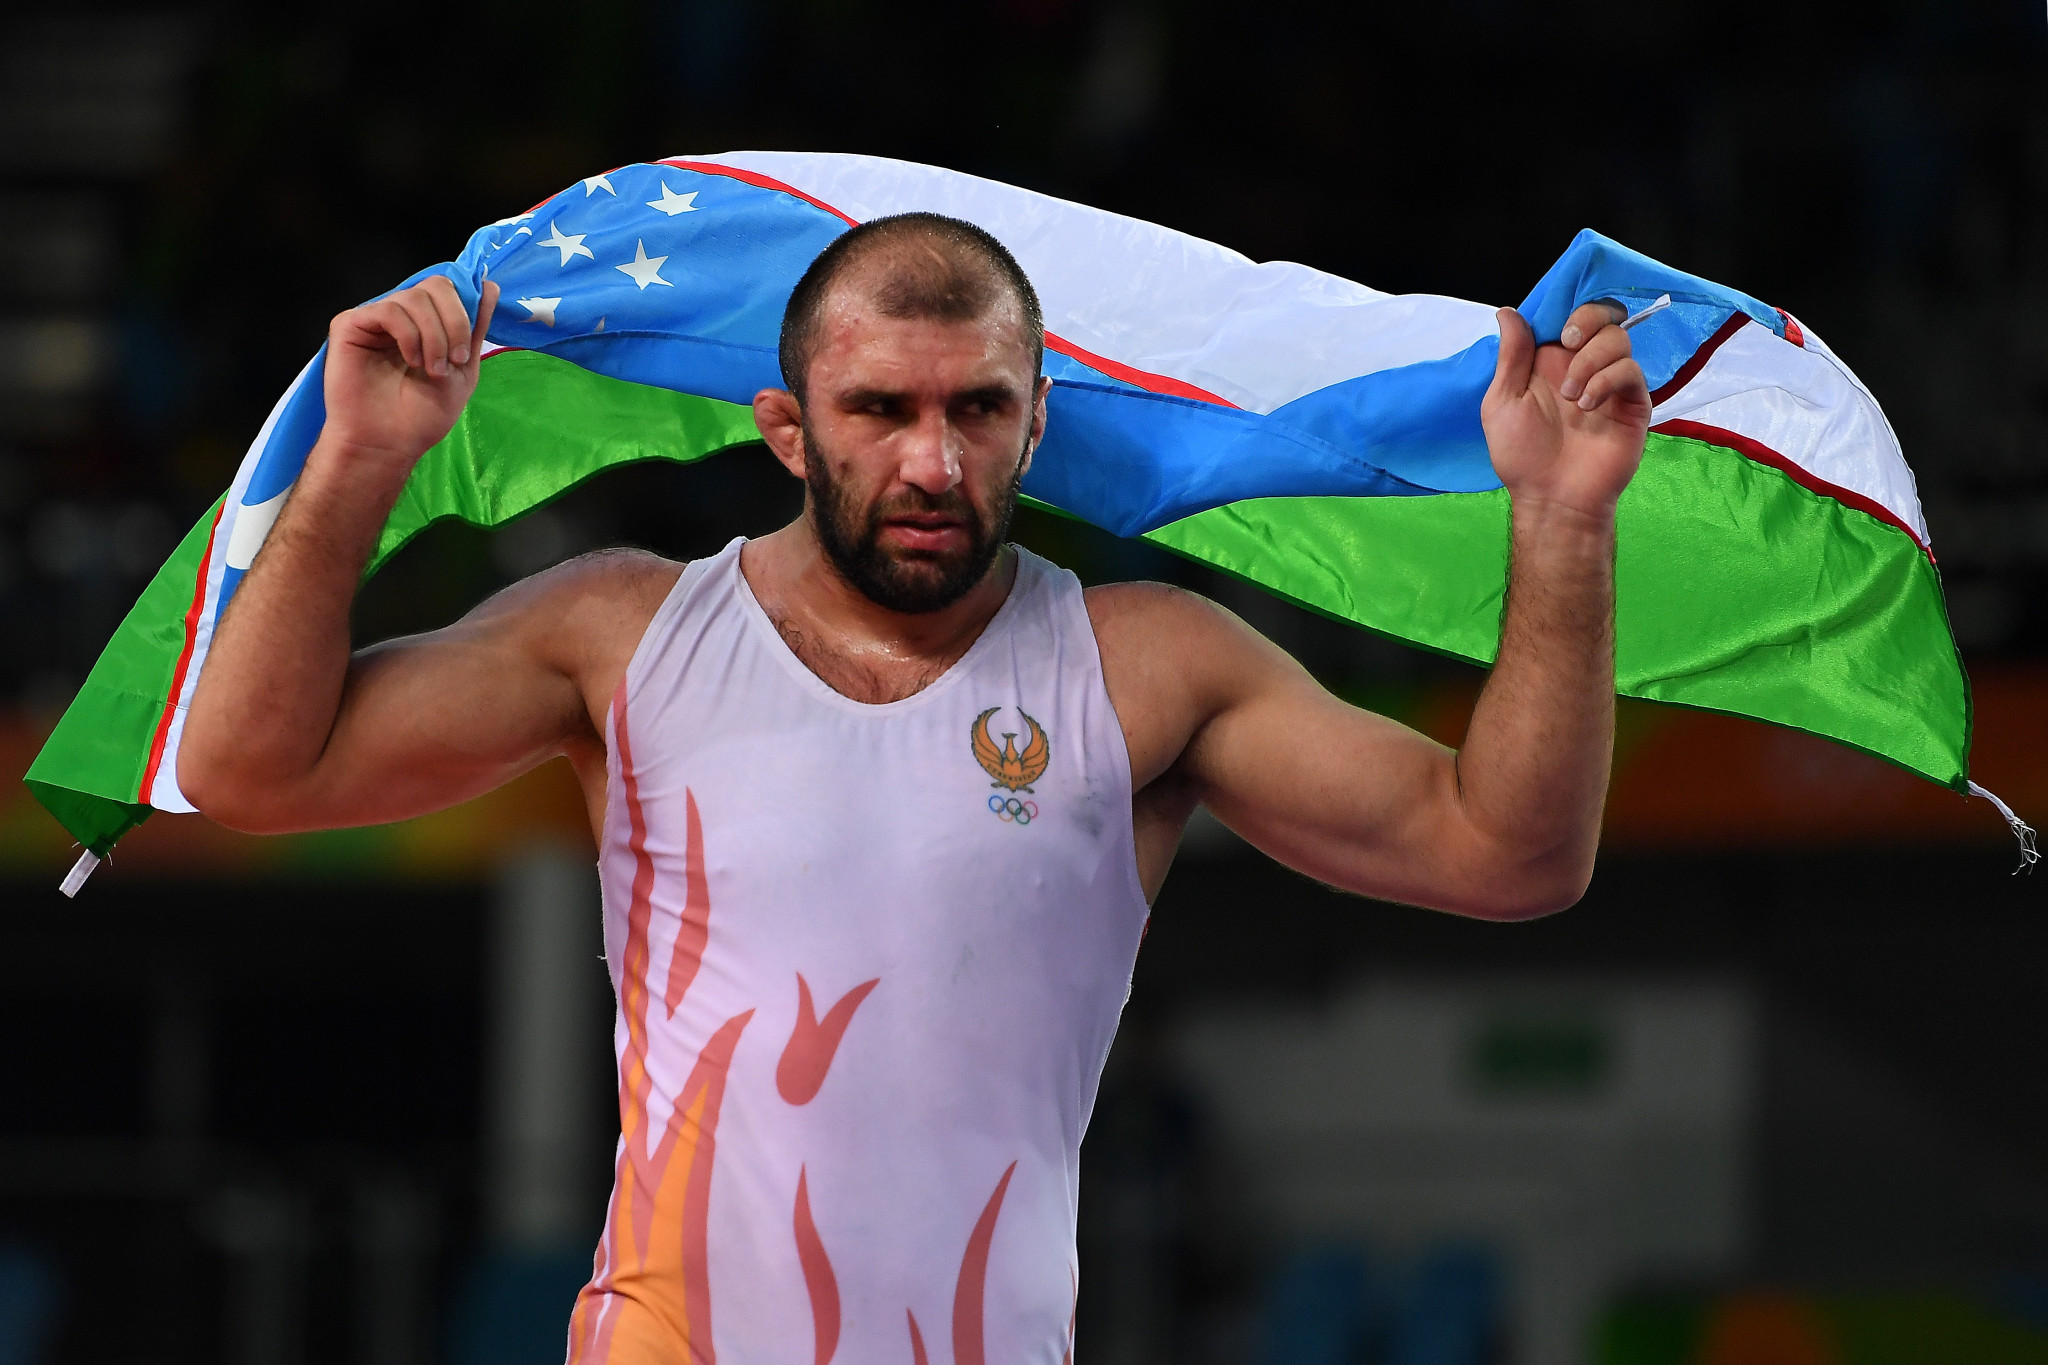 Magomed Ibragimov was one of four wrestlers from Uzbekistan to qualify for Tokyo 2020 today ©Getty Images